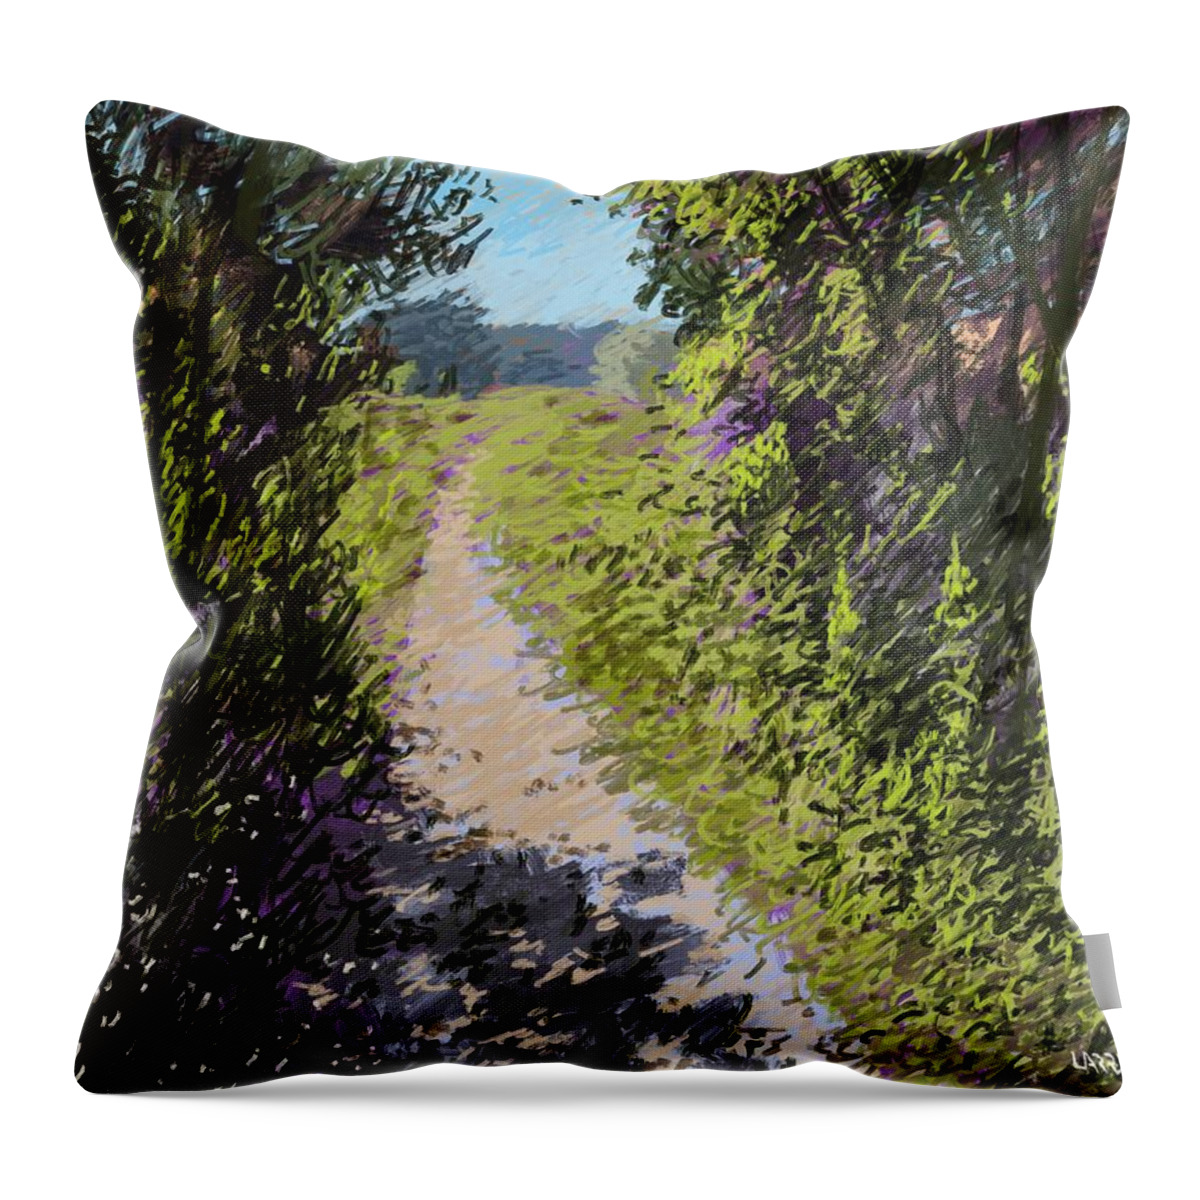 Landscape Throw Pillow featuring the digital art Florida Trail by Larry Whitler